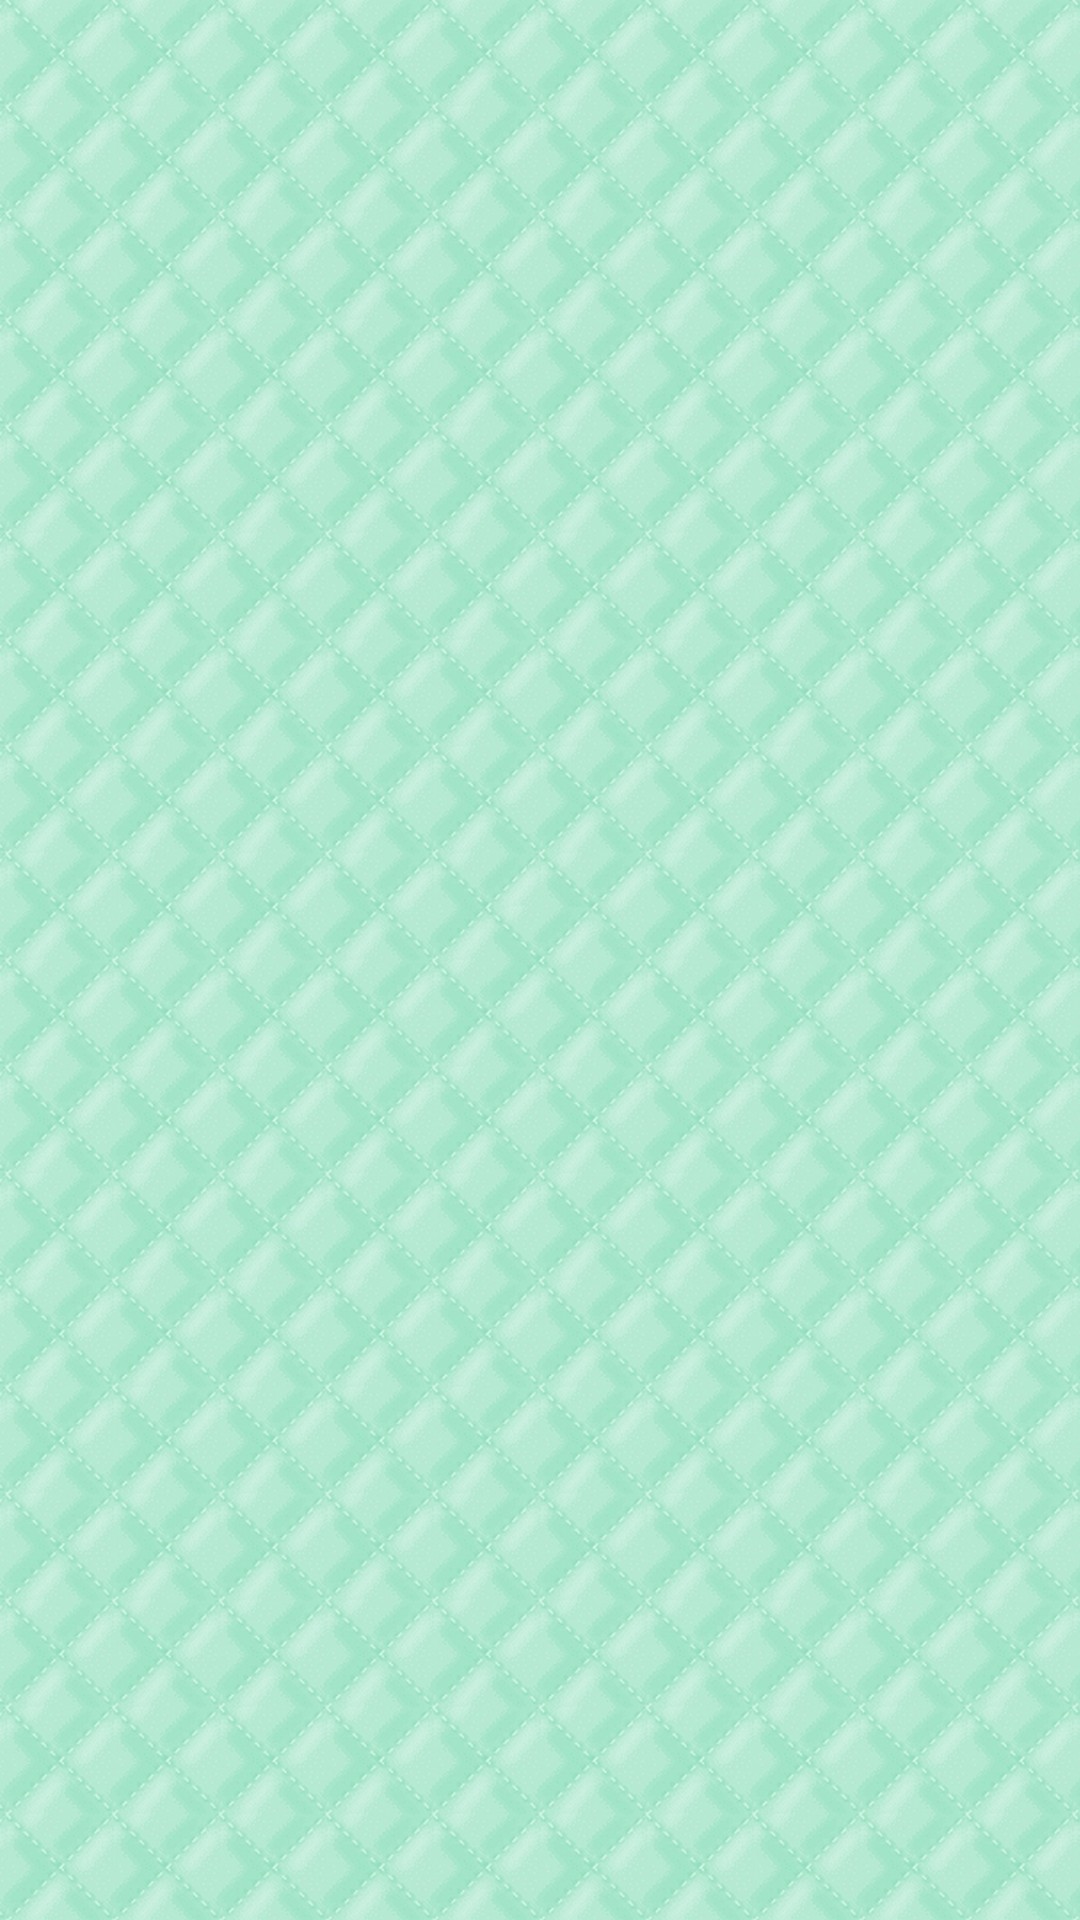 Mint Green Wallpaper Android with image resolution 1080x1920 pixel. You can make this wallpaper for your Android backgrounds, Tablet, Smartphones Screensavers and Mobile Phone Lock Screen